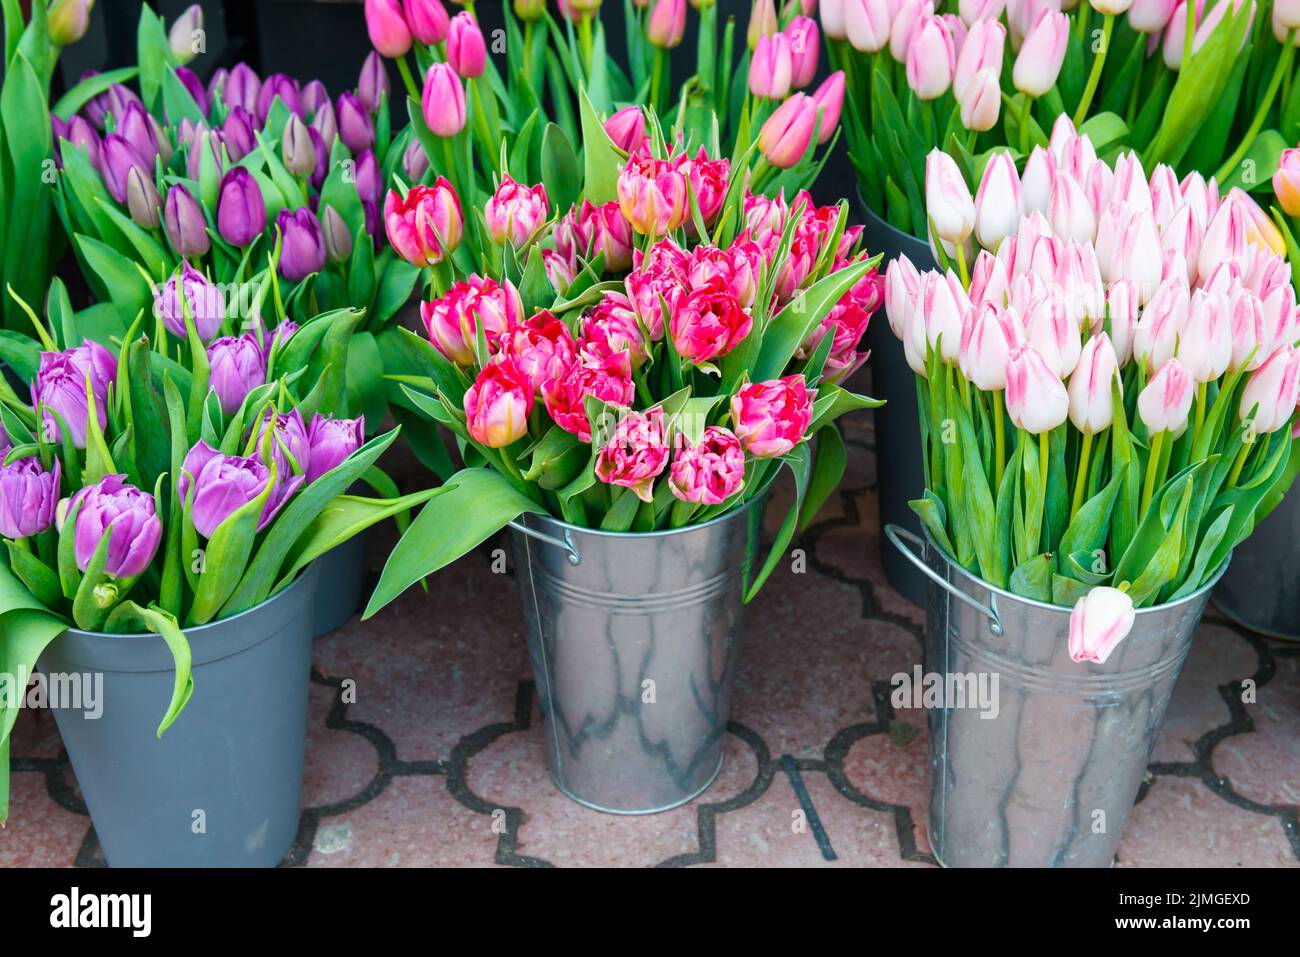 Spring flowers tulips in buckets Stock Photo